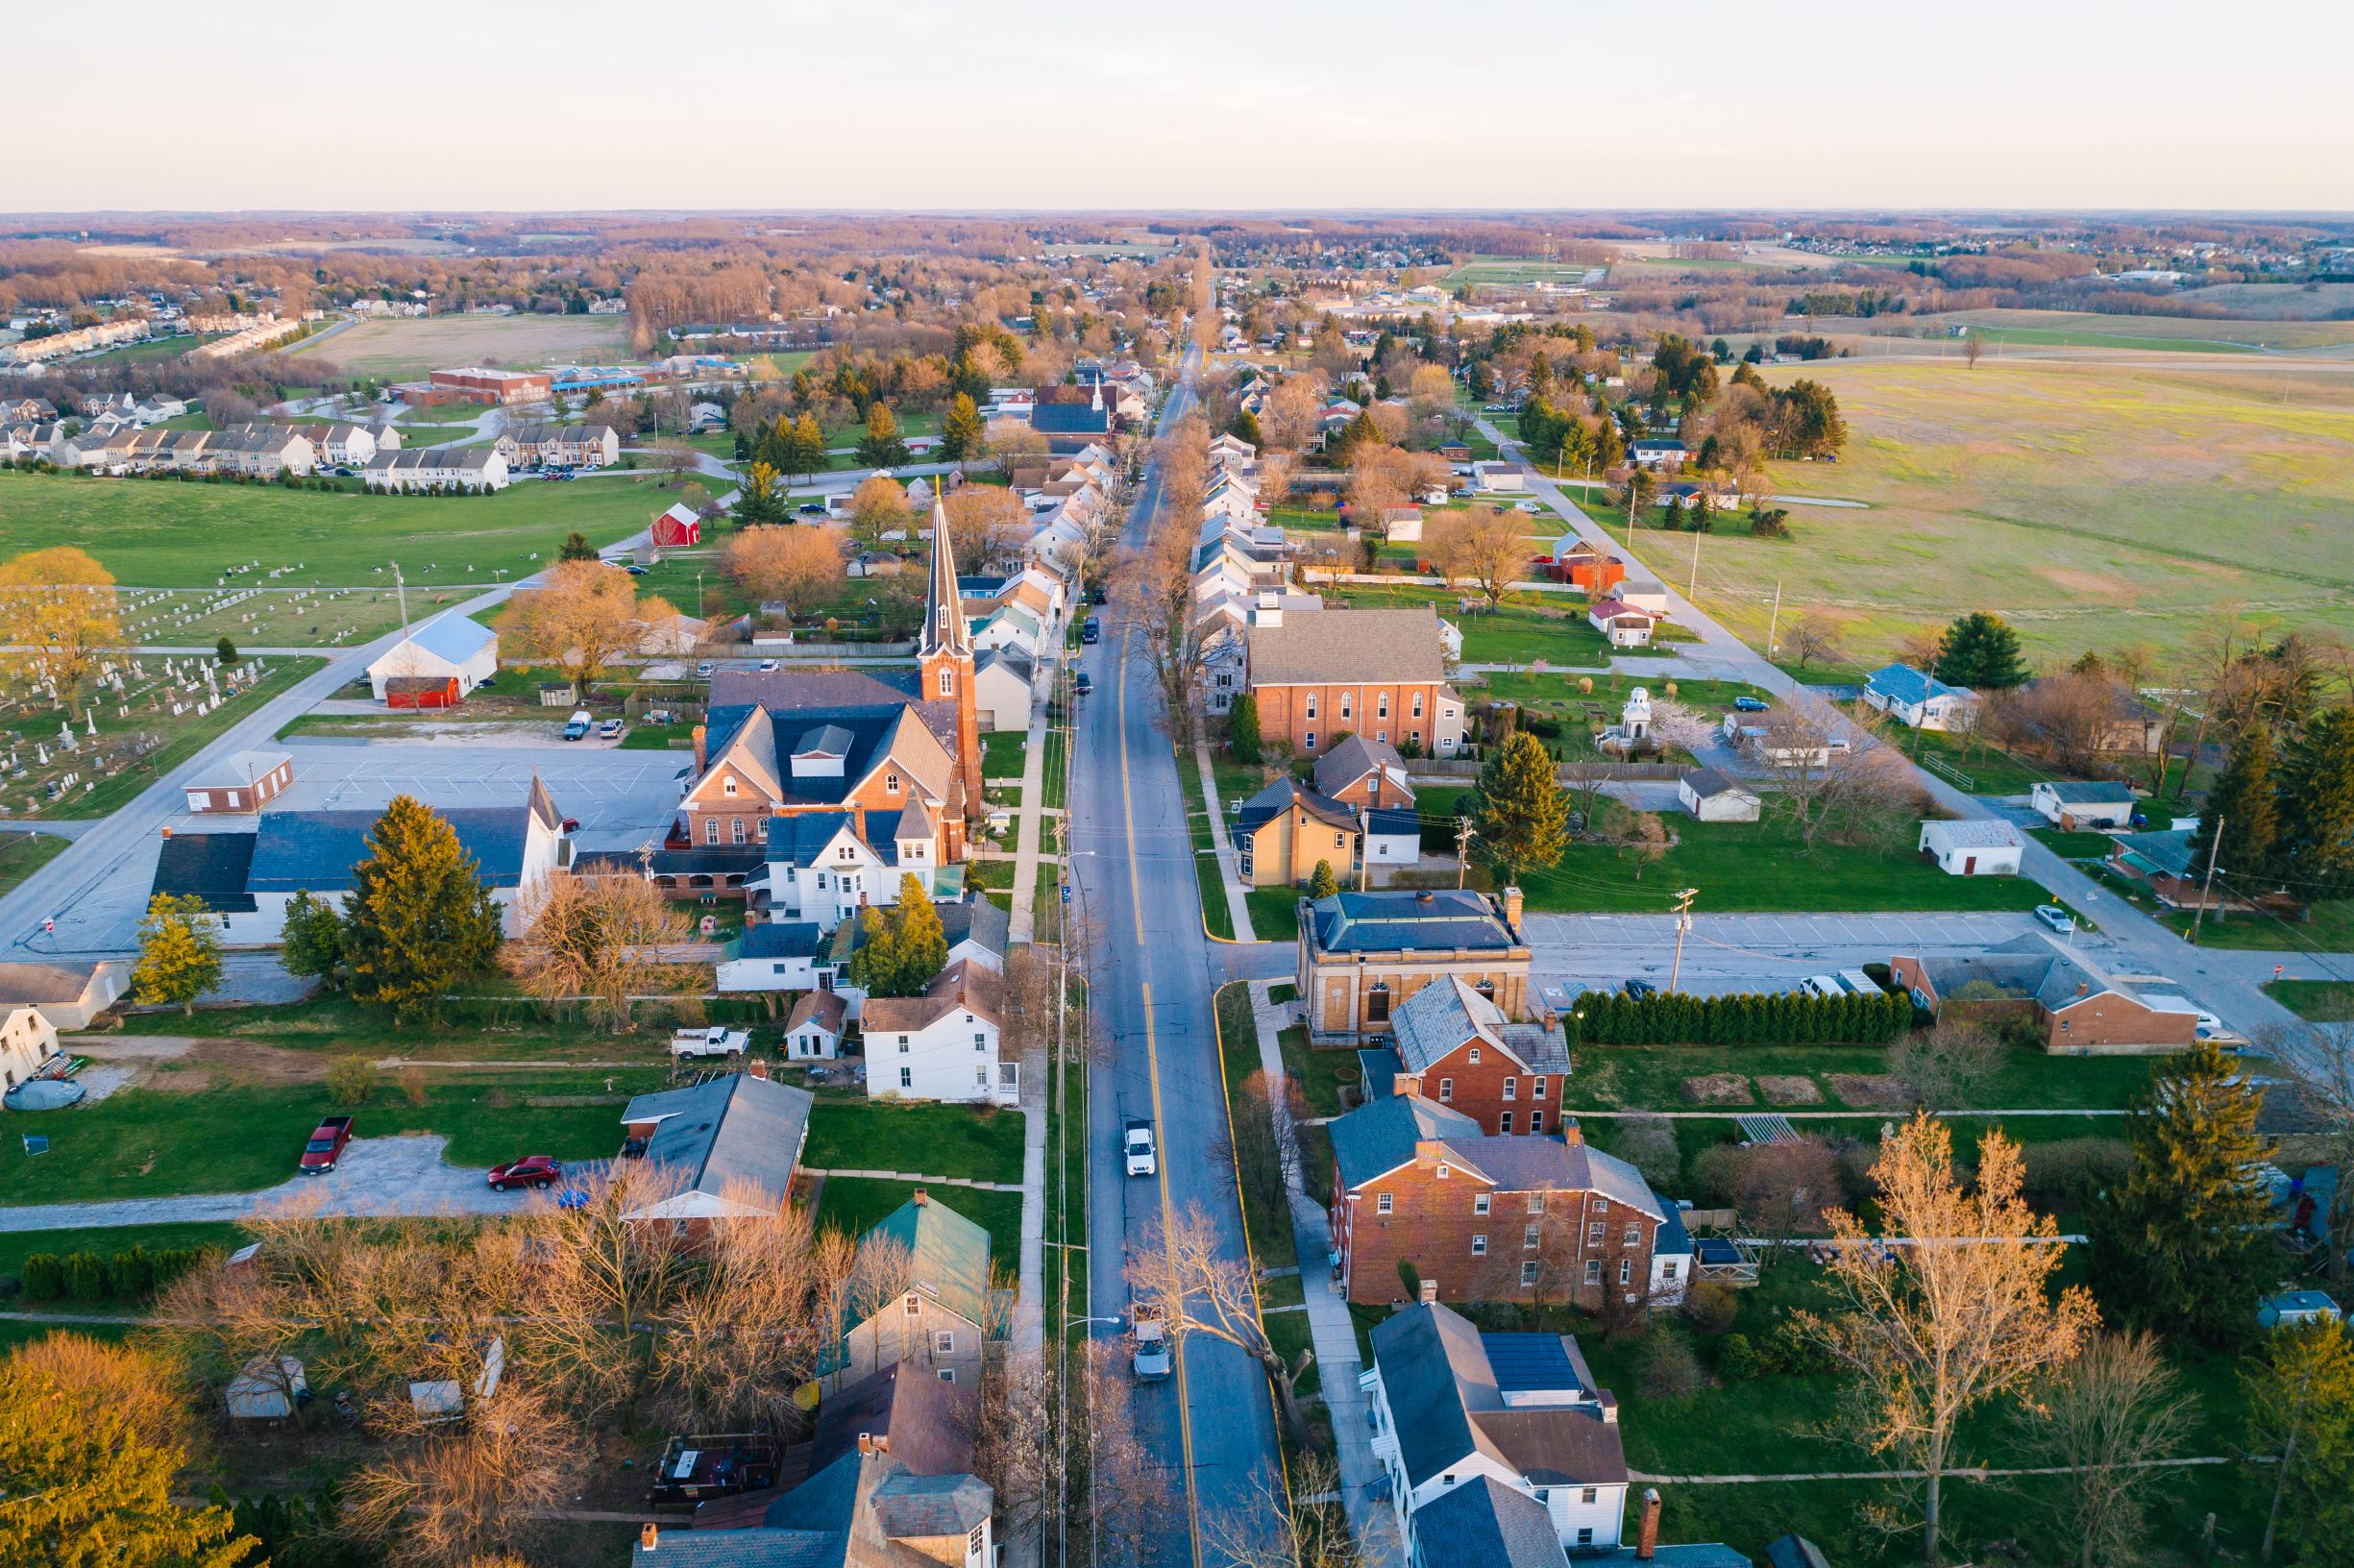 Reimagining Rural Policy Organizing Federal Assistance To Maximize Rural Prosperity